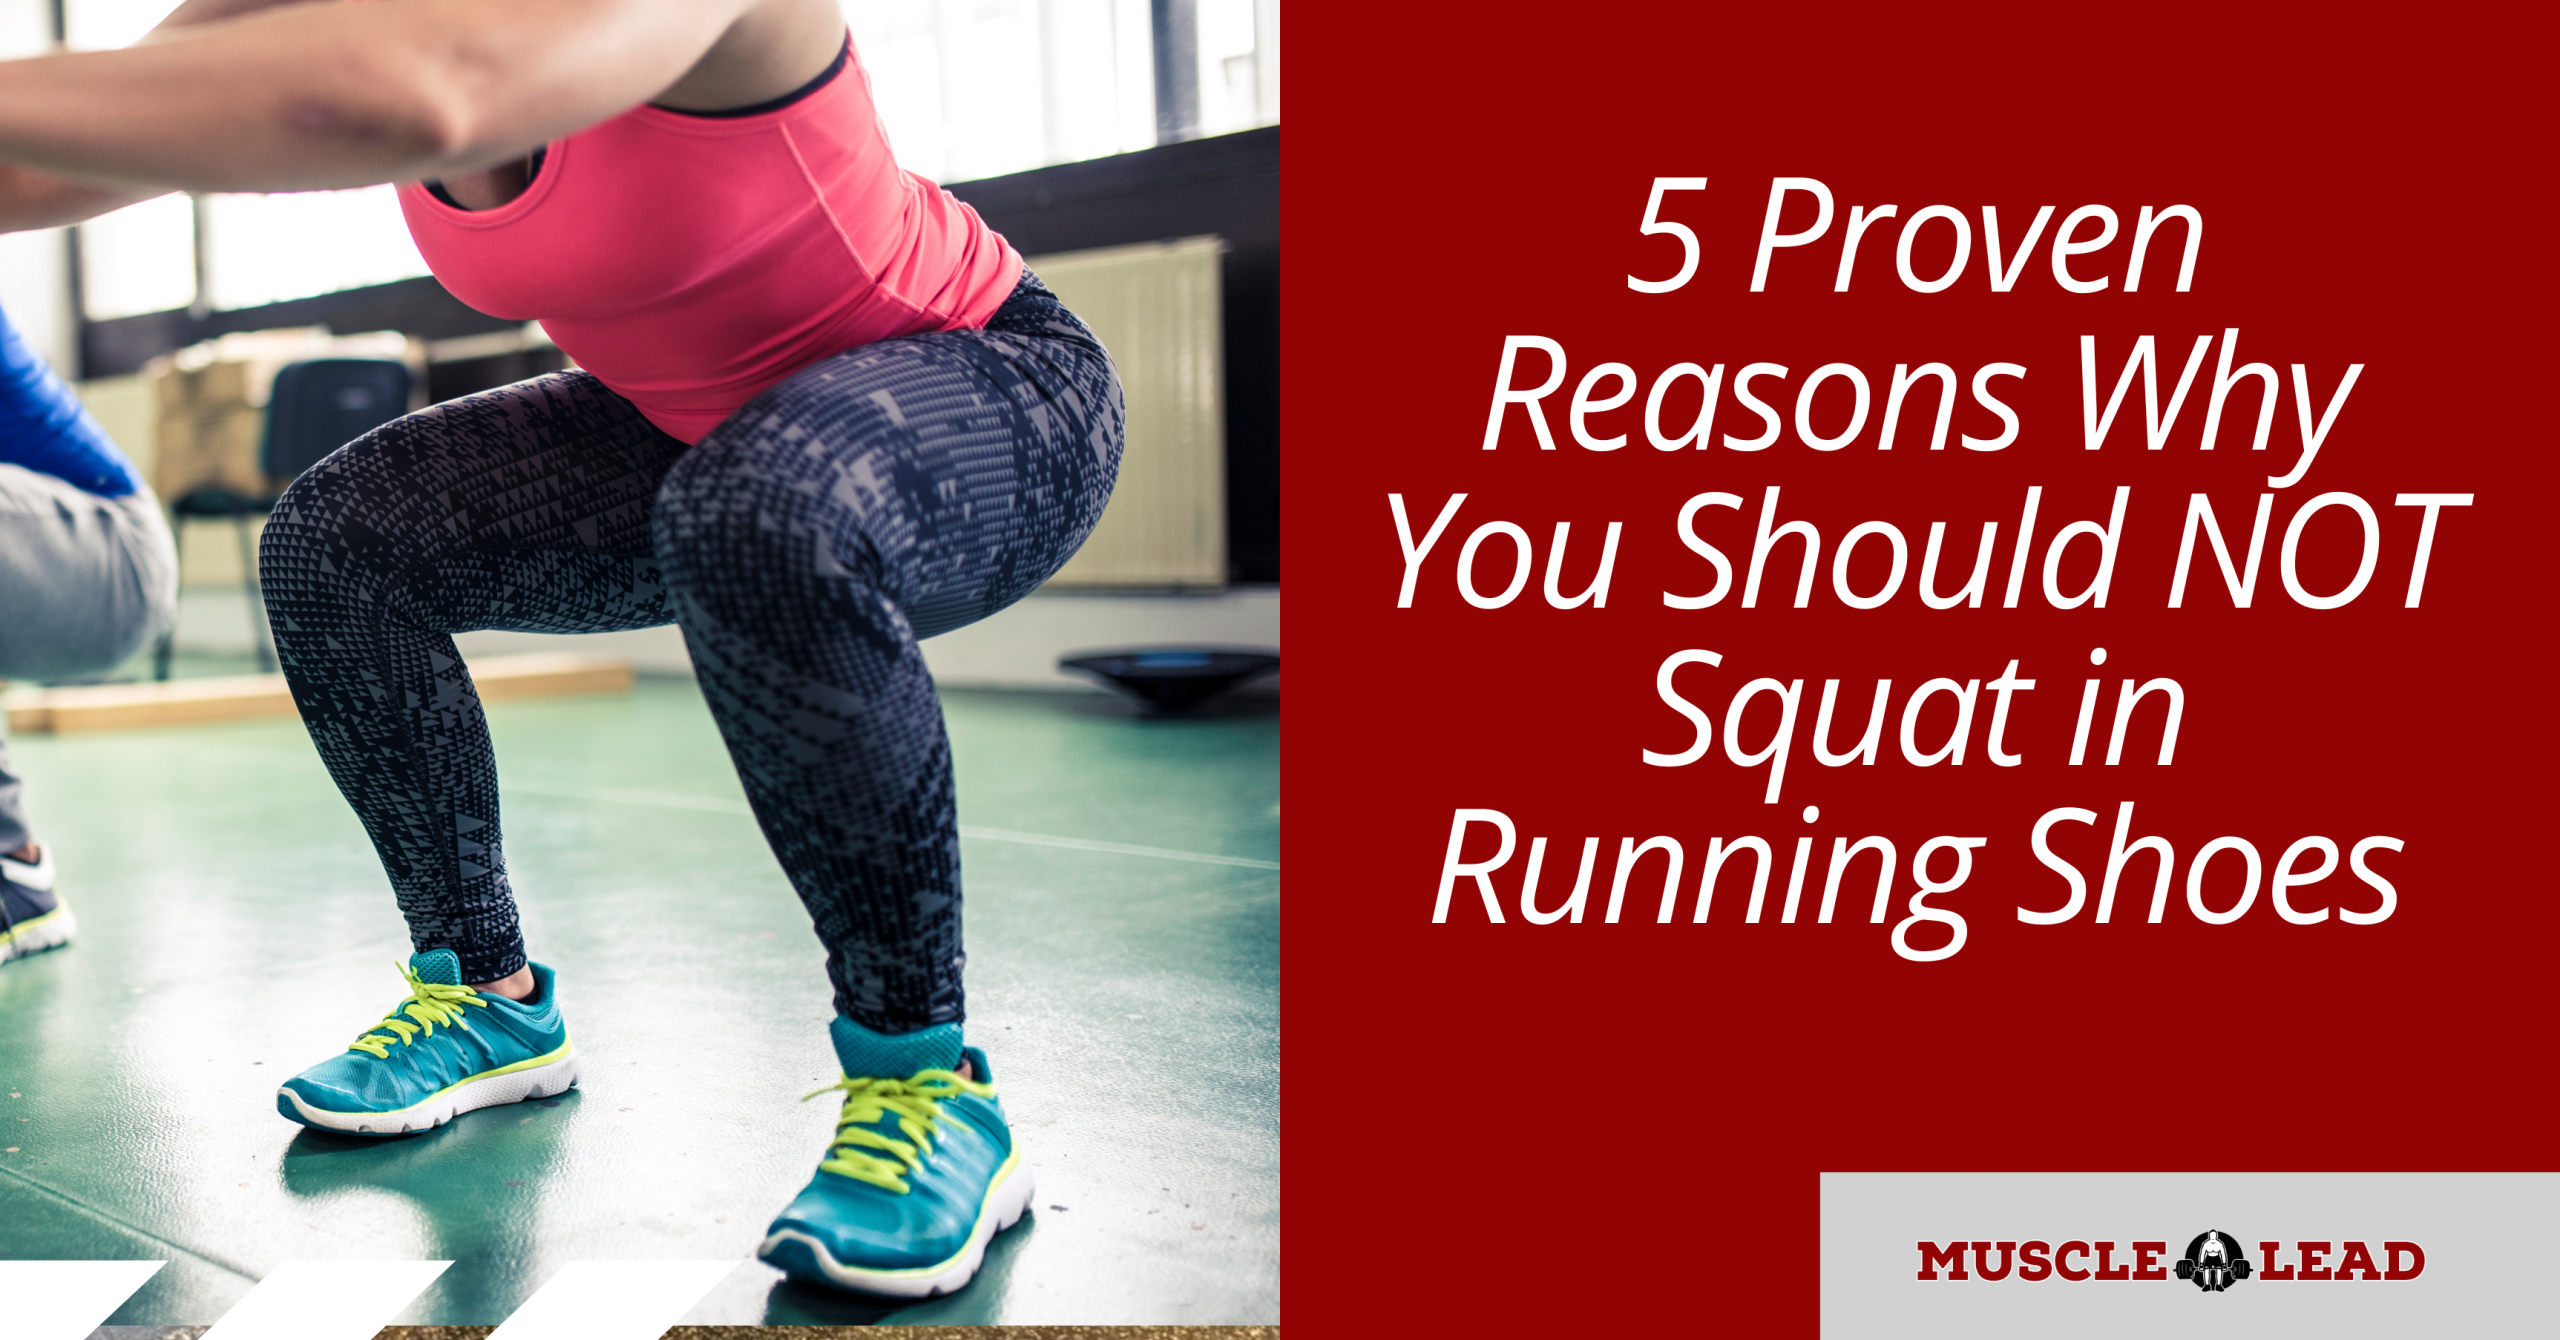 5 Proven Reasons Why You Should NOT Squat in Running Shoes